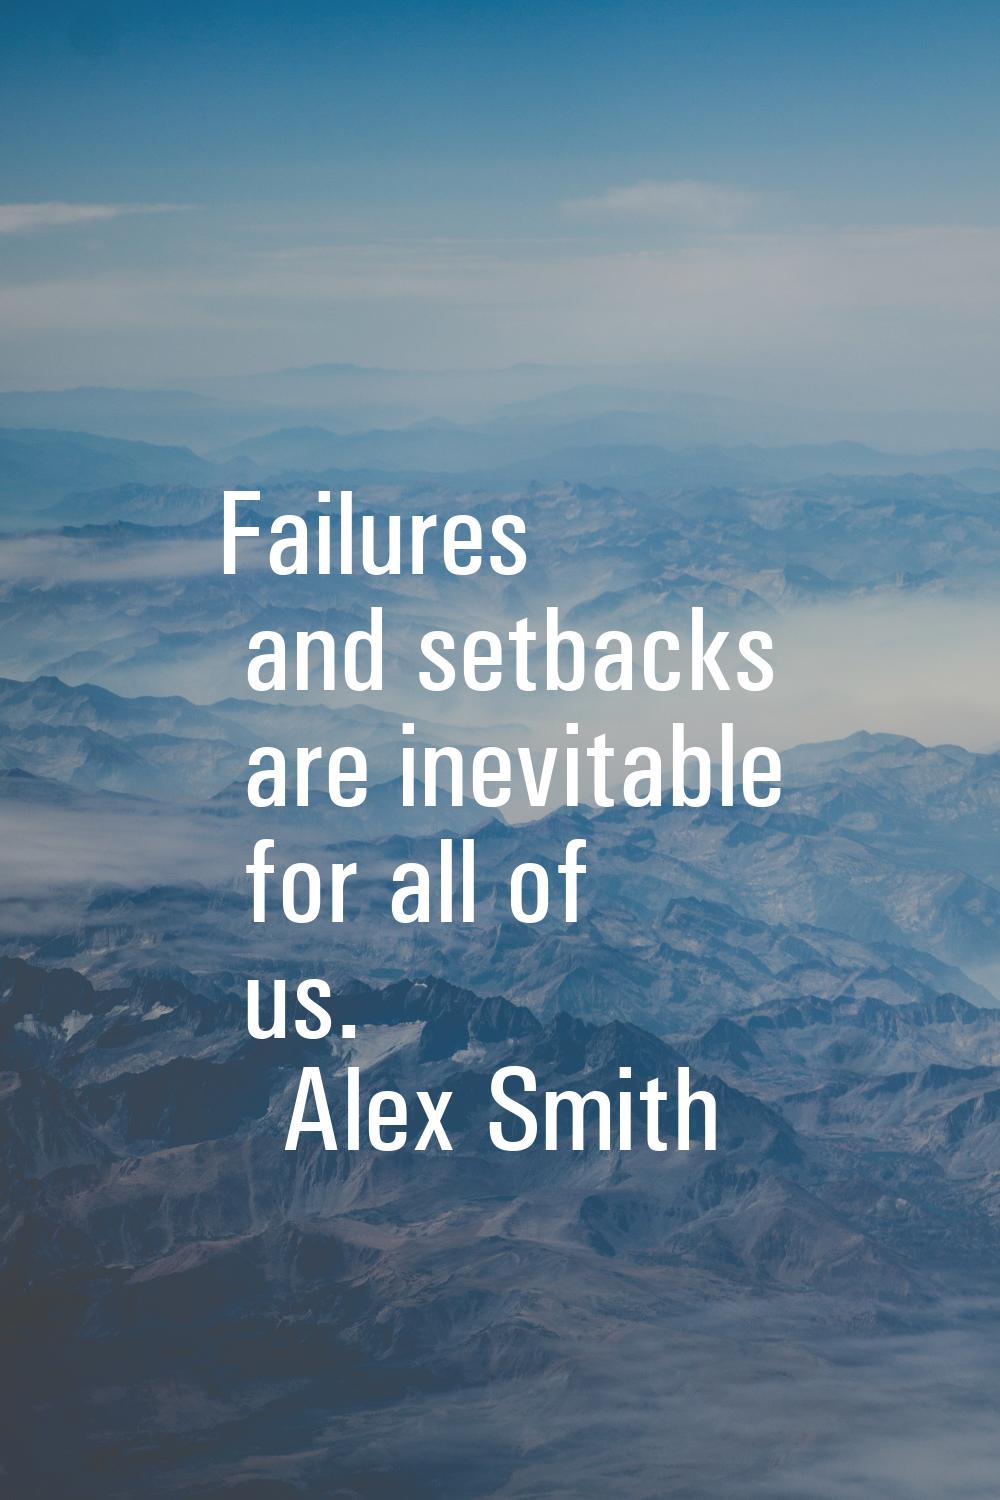 Failures and setbacks are inevitable for all of us.